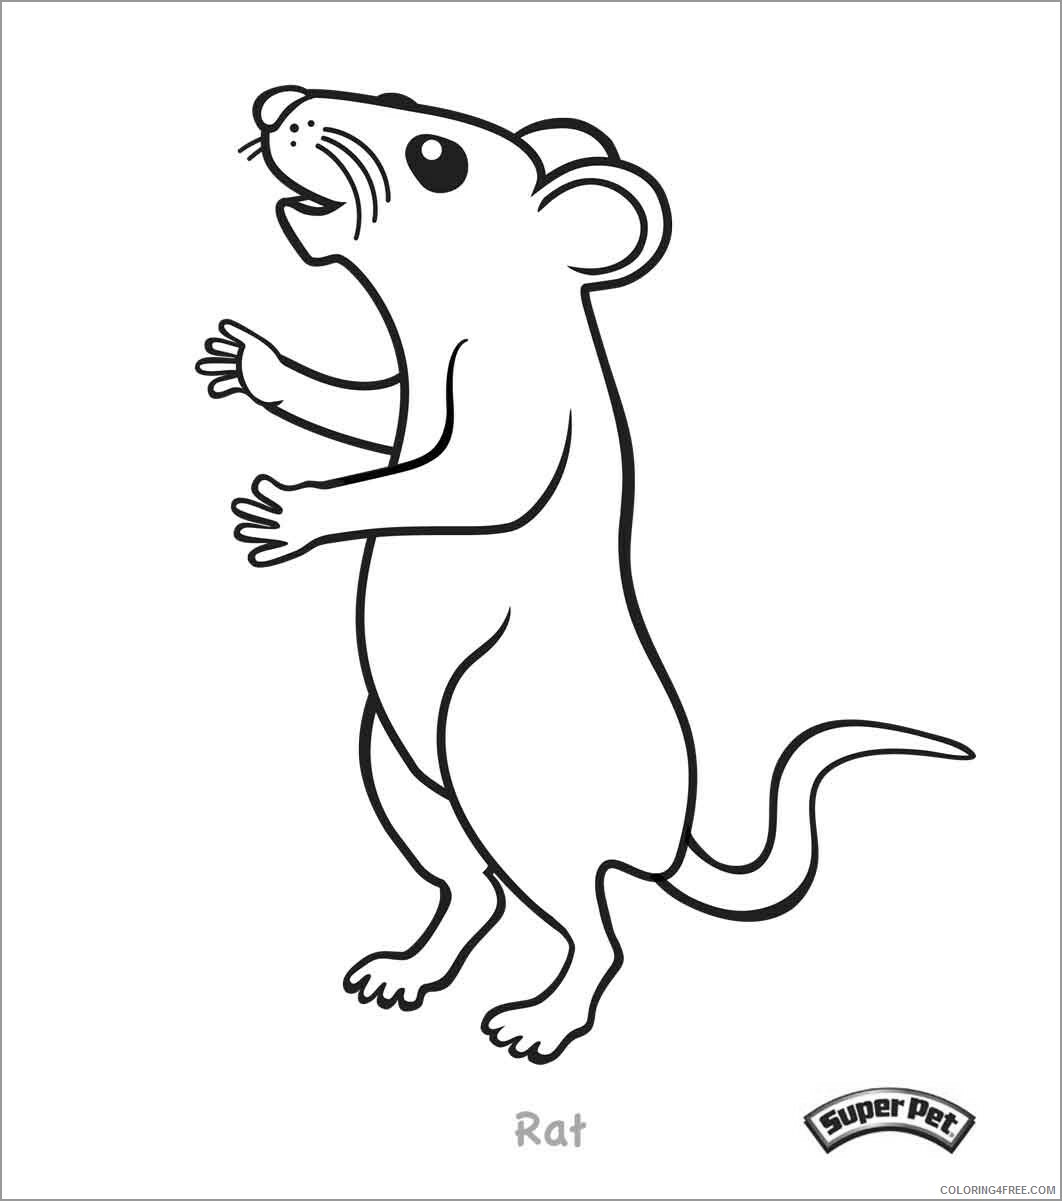 Rat Coloring Pages Animal Printable Sheets of a rat 2021 4244 Coloring4free